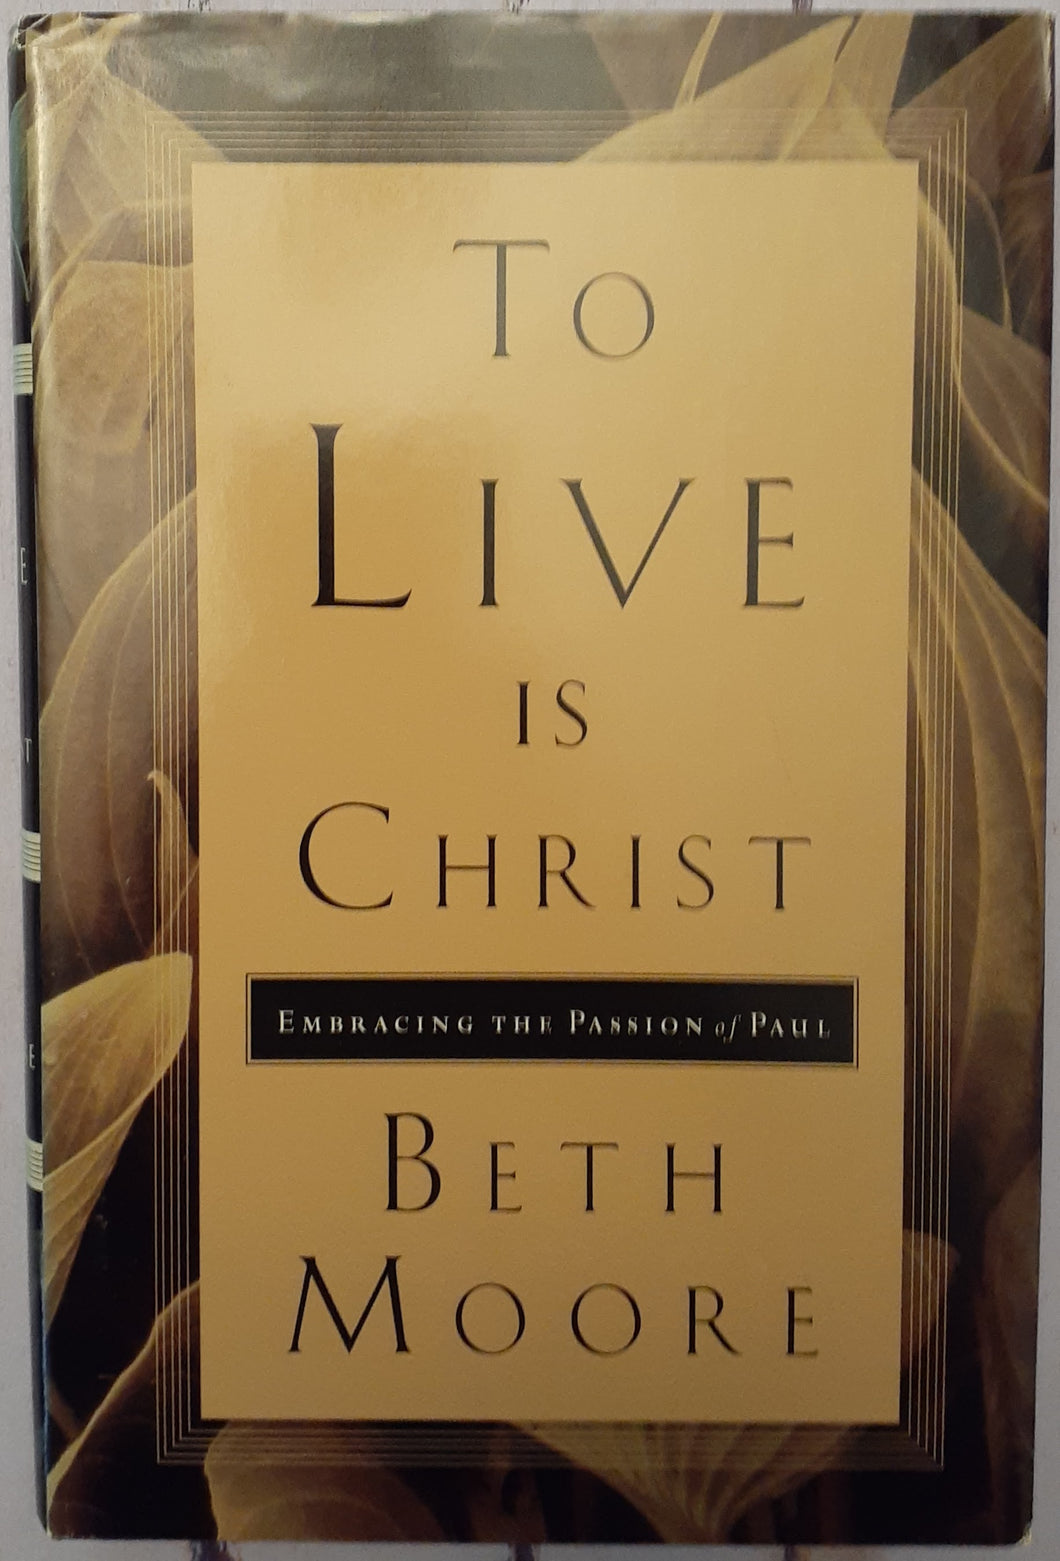 To Live is Christ: Embracing the Passion of Paul